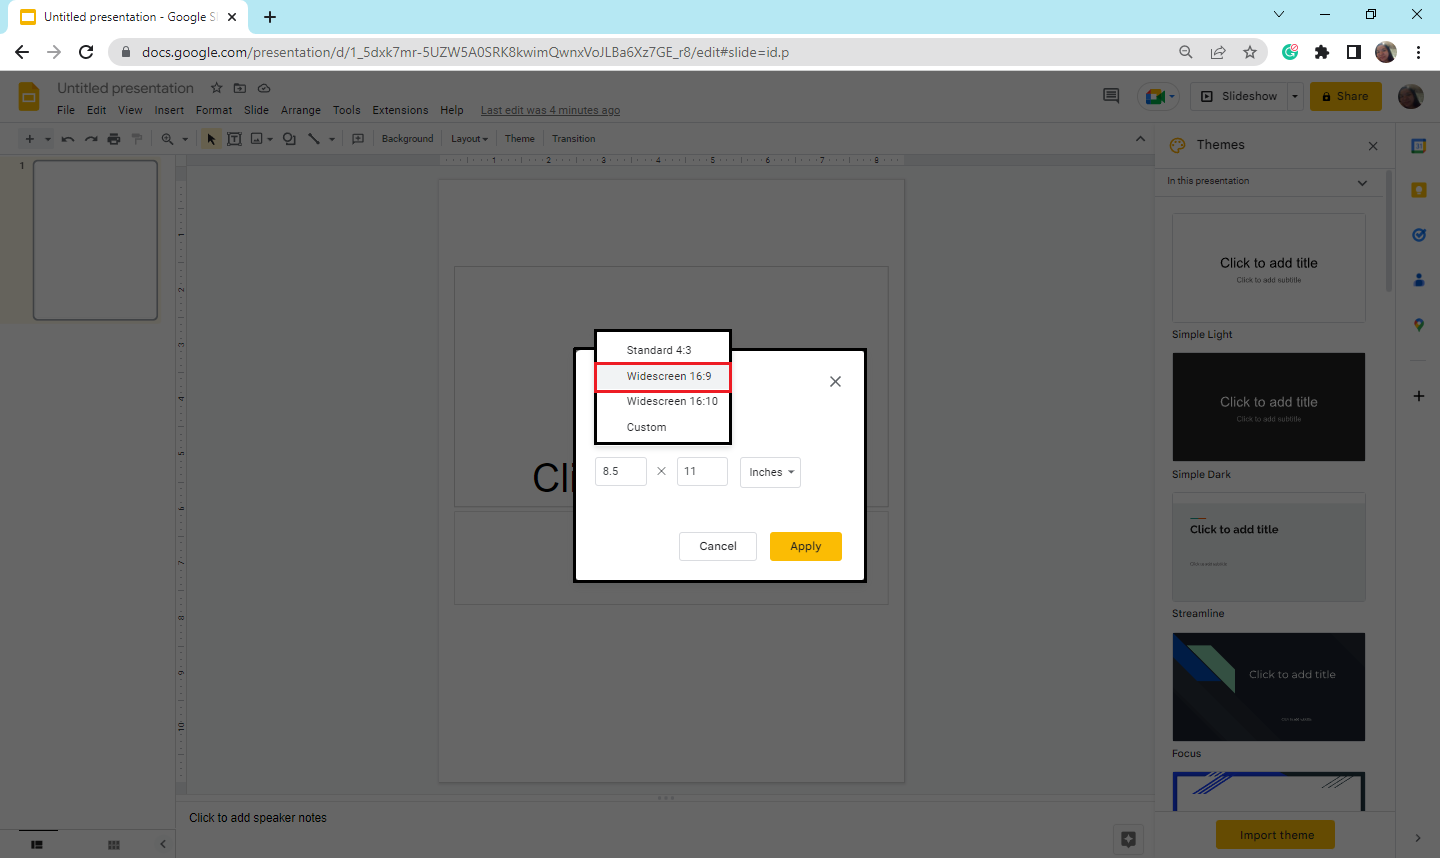 Select the default layout for Google Slides which is " widescreen" with a current aspect ratio of 16:9